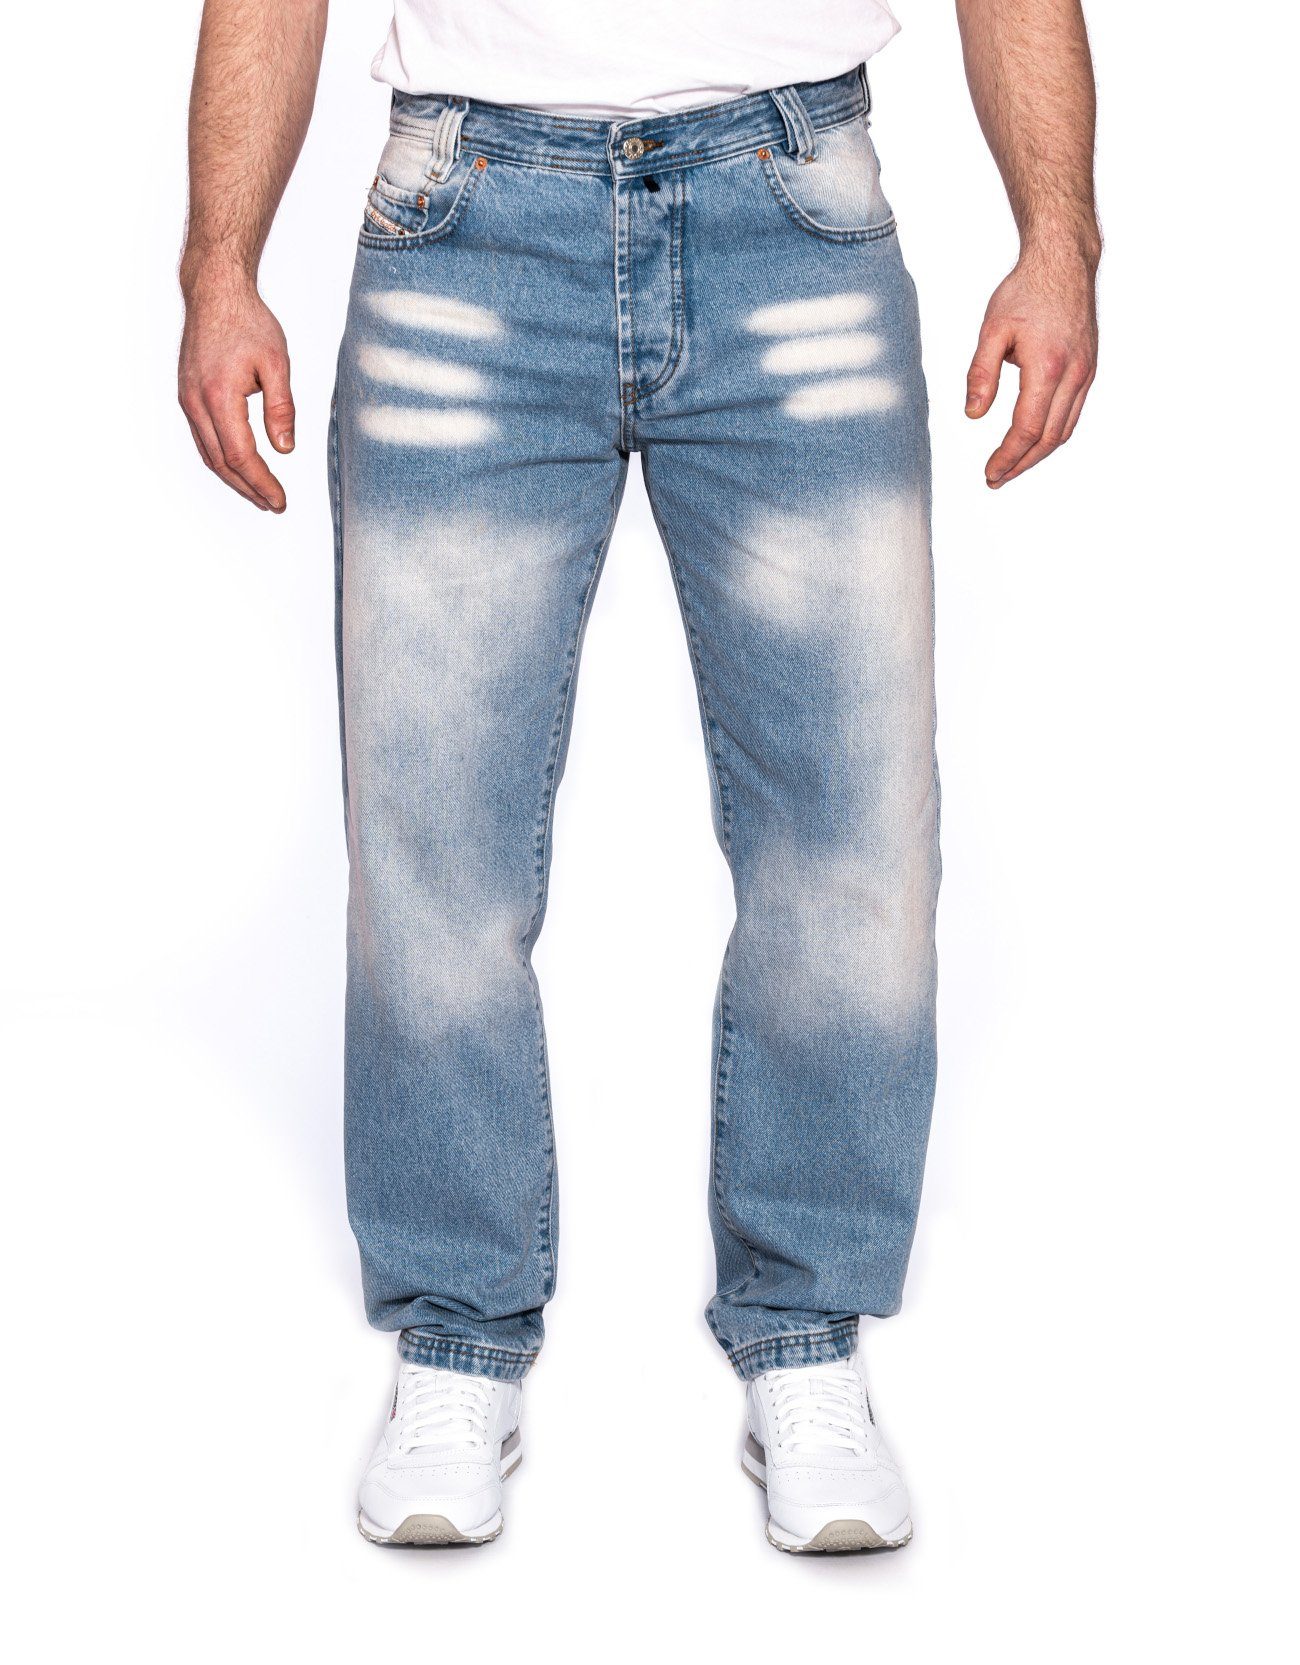 PICALDI Jeans Weite Jeans Zicco 472 Loose Fit, Relaxed Fit Chemie 1 | Weite Jeans